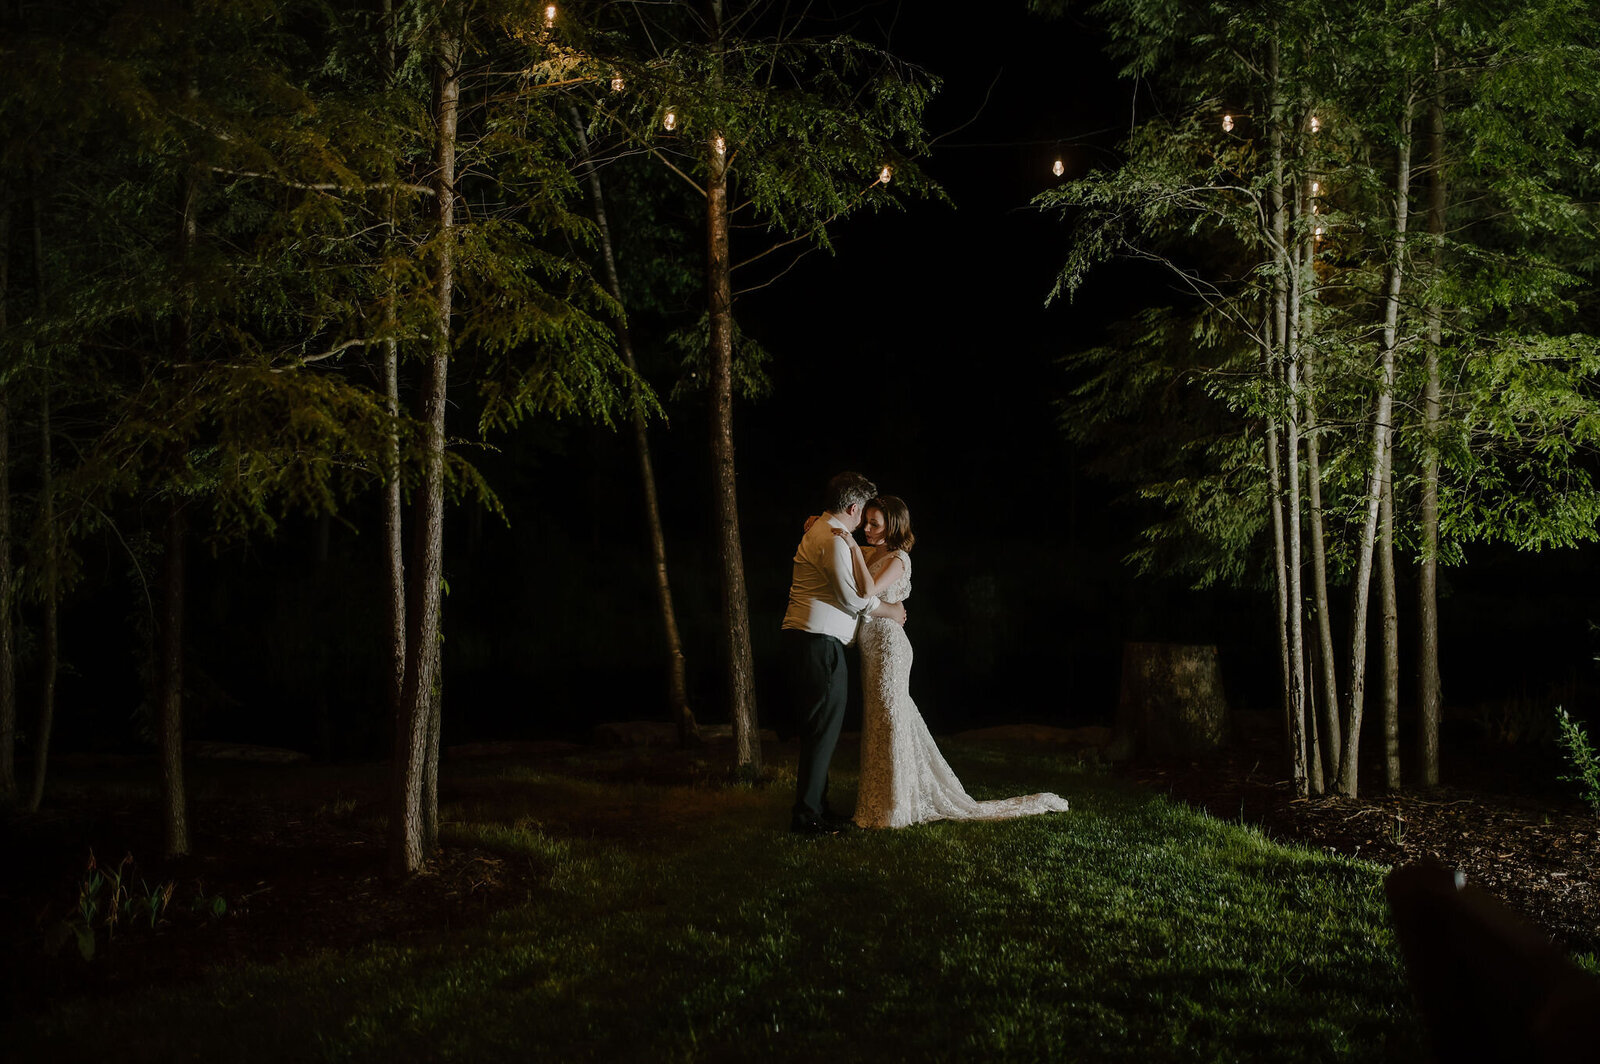 couple dancing under string lights in the forest wedding first dance